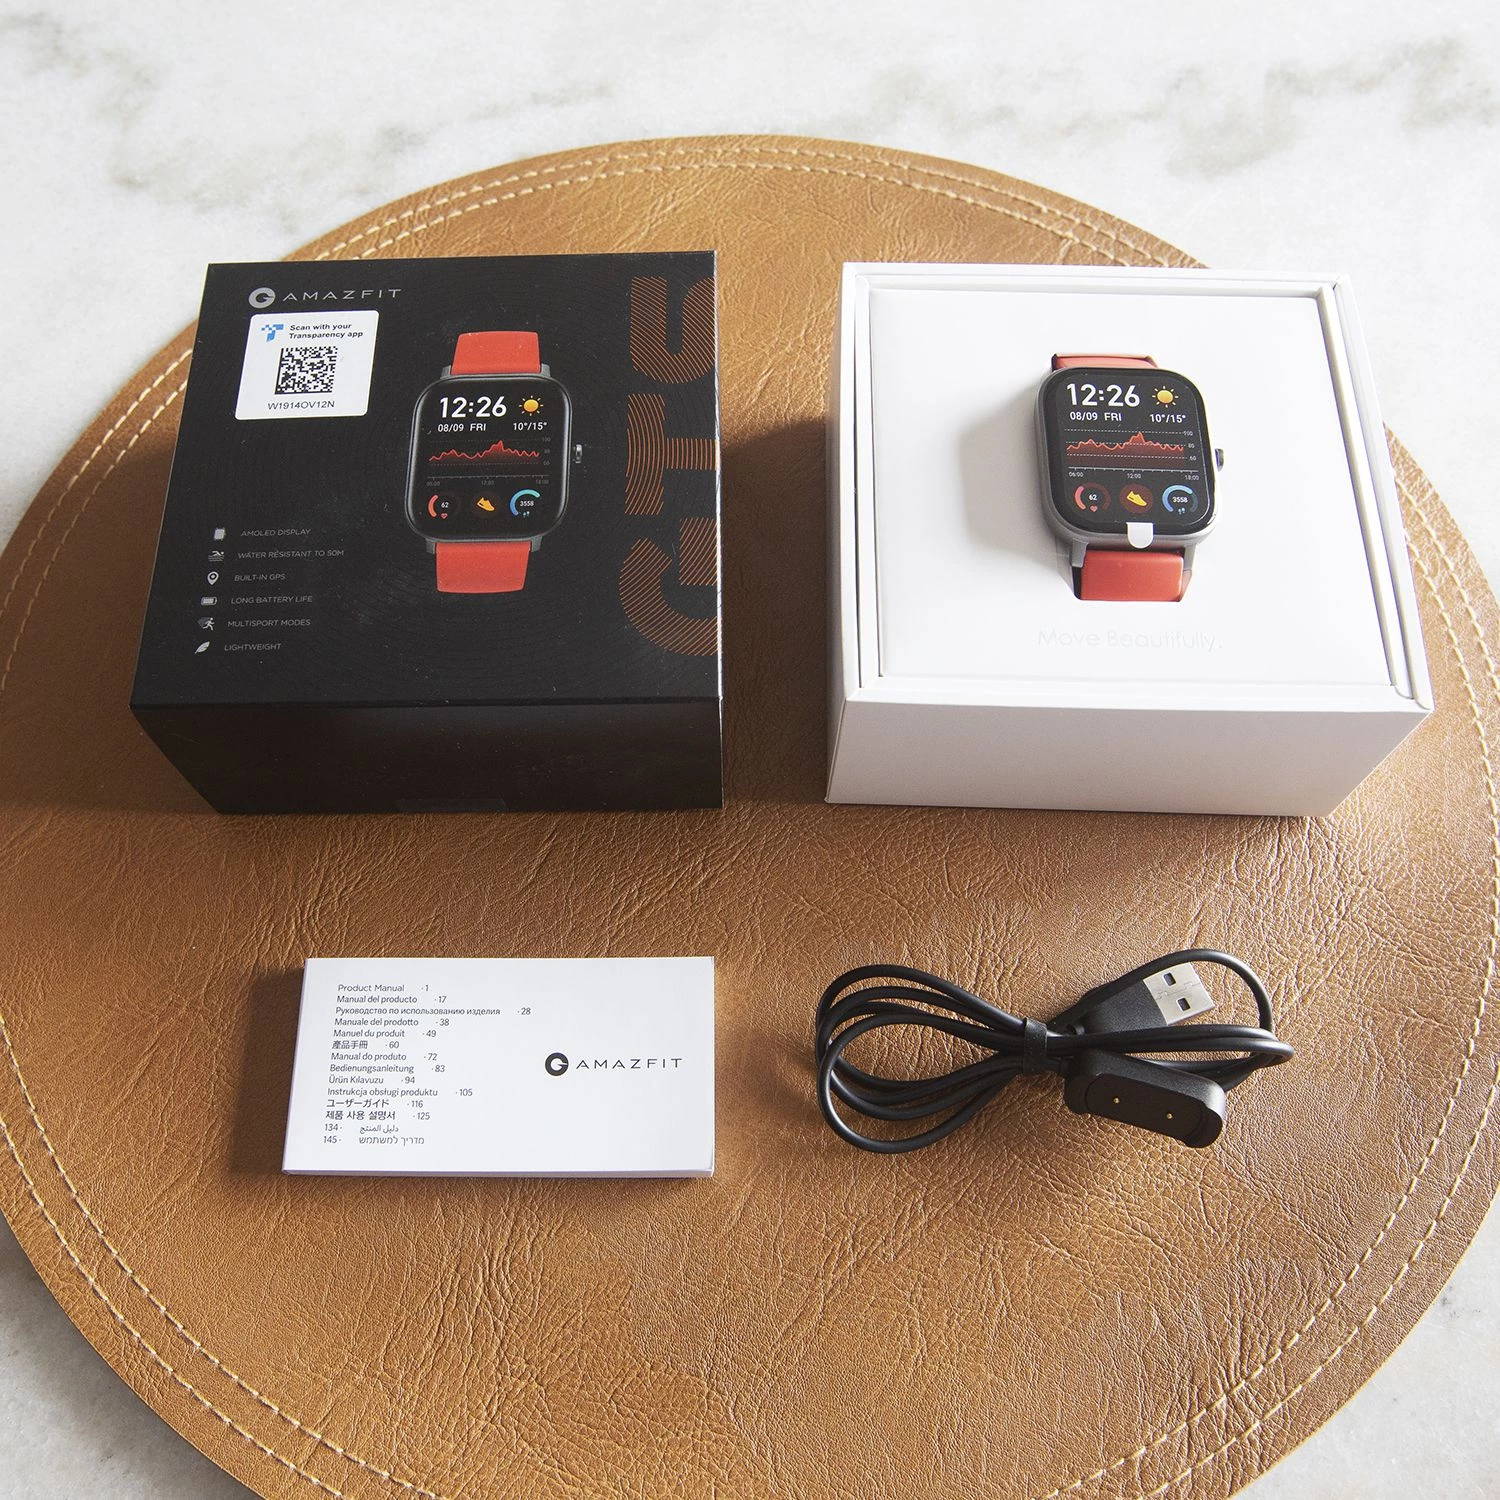 Amazfit GTS review: Looks beautiful, great for fitness enthusiasts